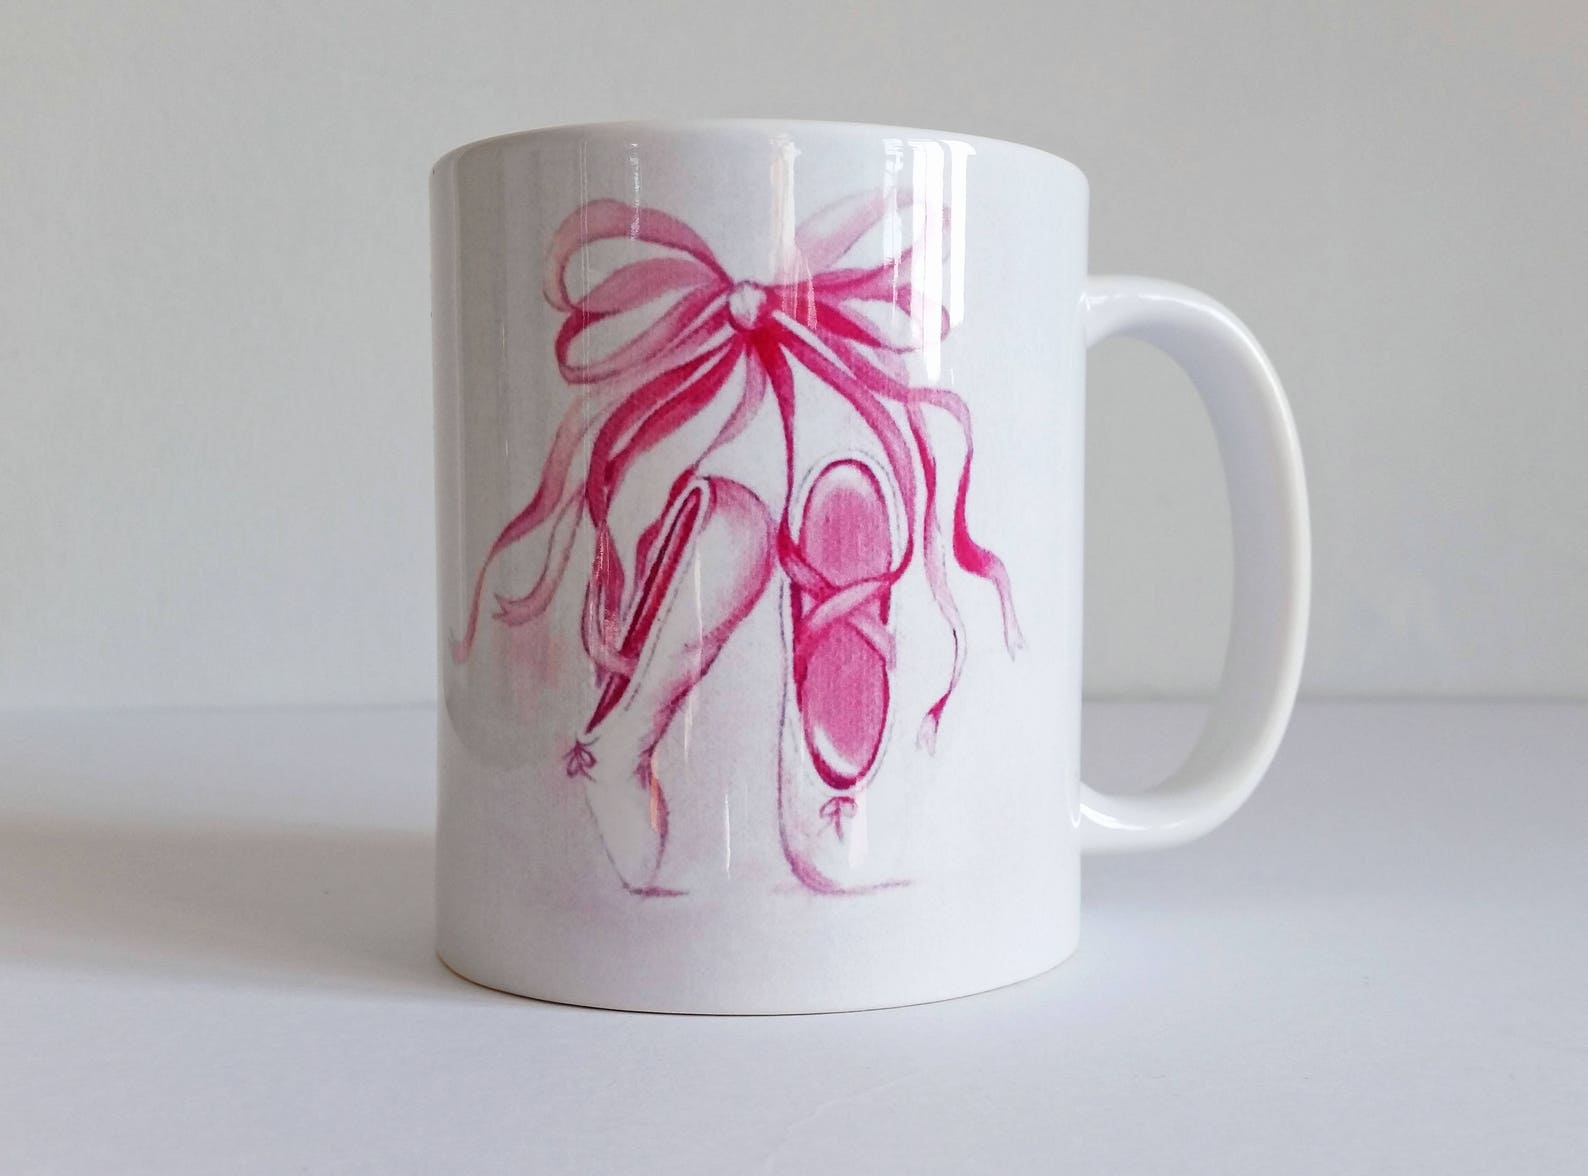 ready made mug featuring my ballet shoes design - perfect gift for a little dancer - 1 working day dispatch